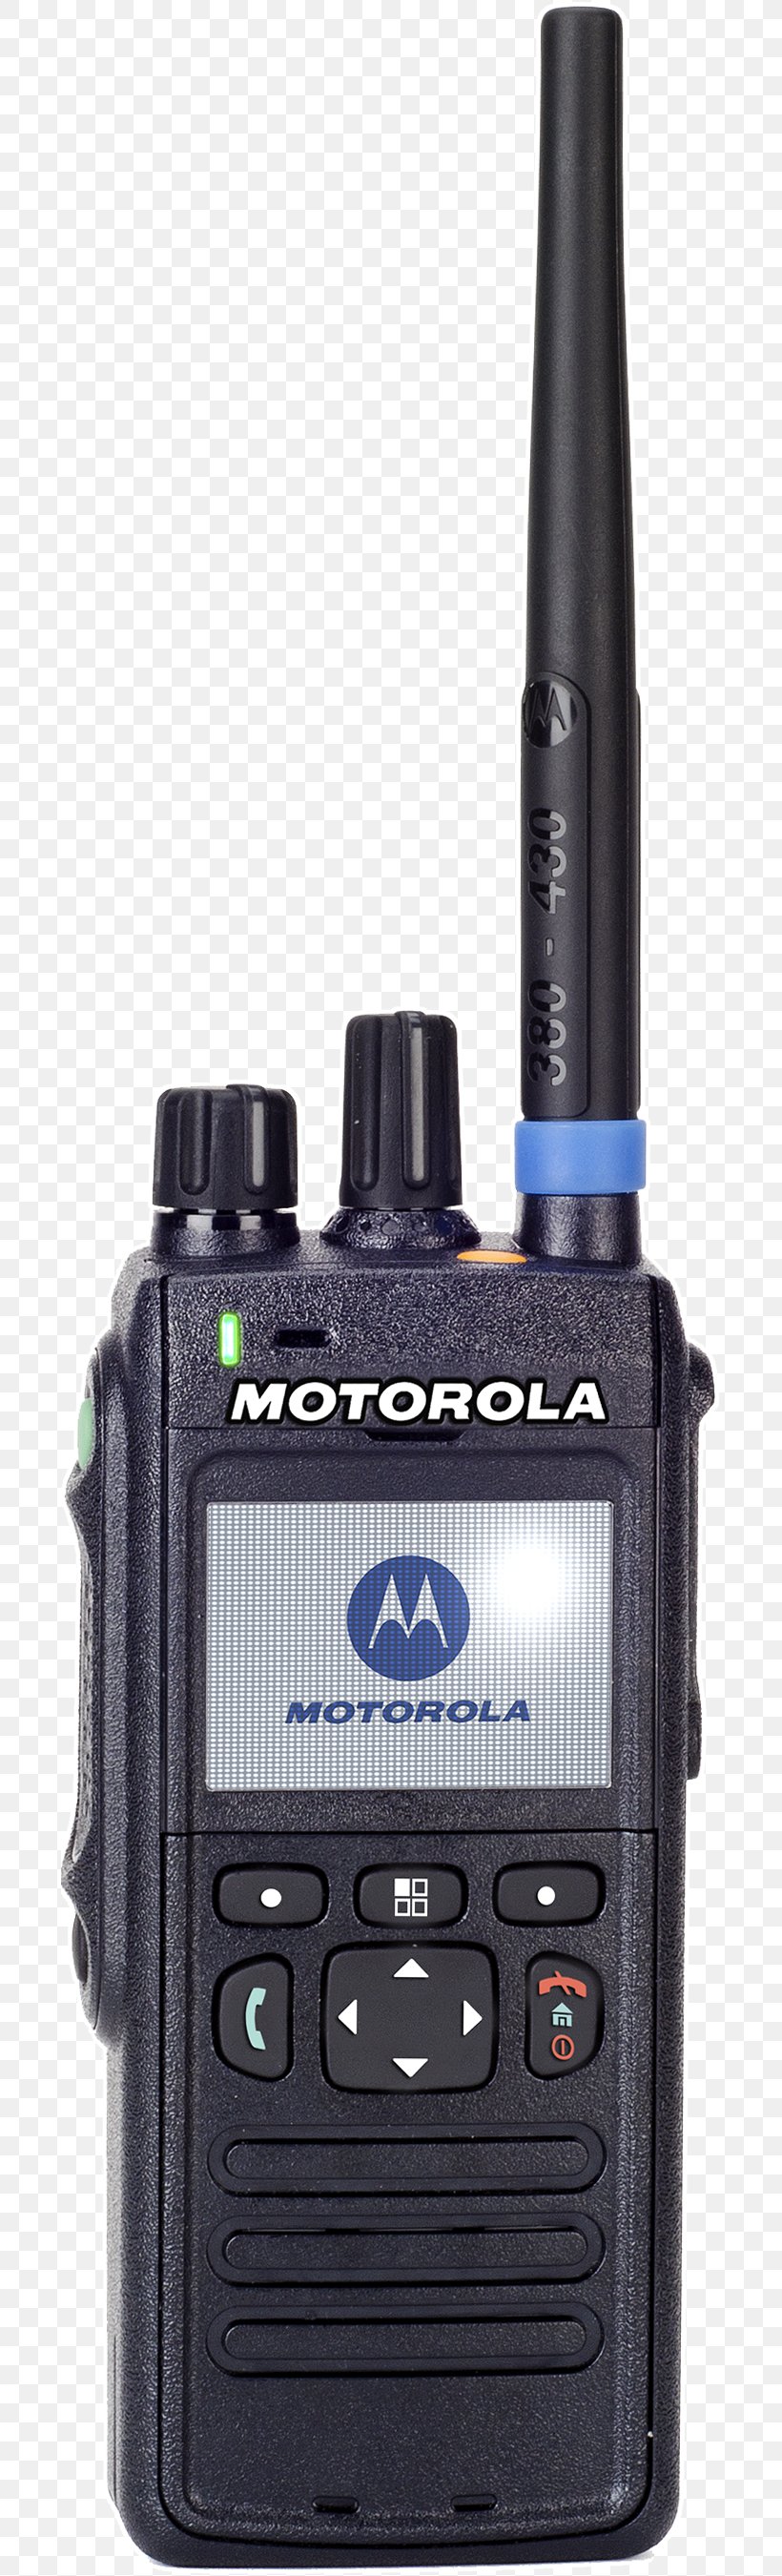 Terrestrial Trunked Radio Motorola Solutions Walkie-talkie Communication, PNG, 692x2701px, Terrestrial Trunked Radio, Business, Communication, Communication Device, Electronic Device Download Free